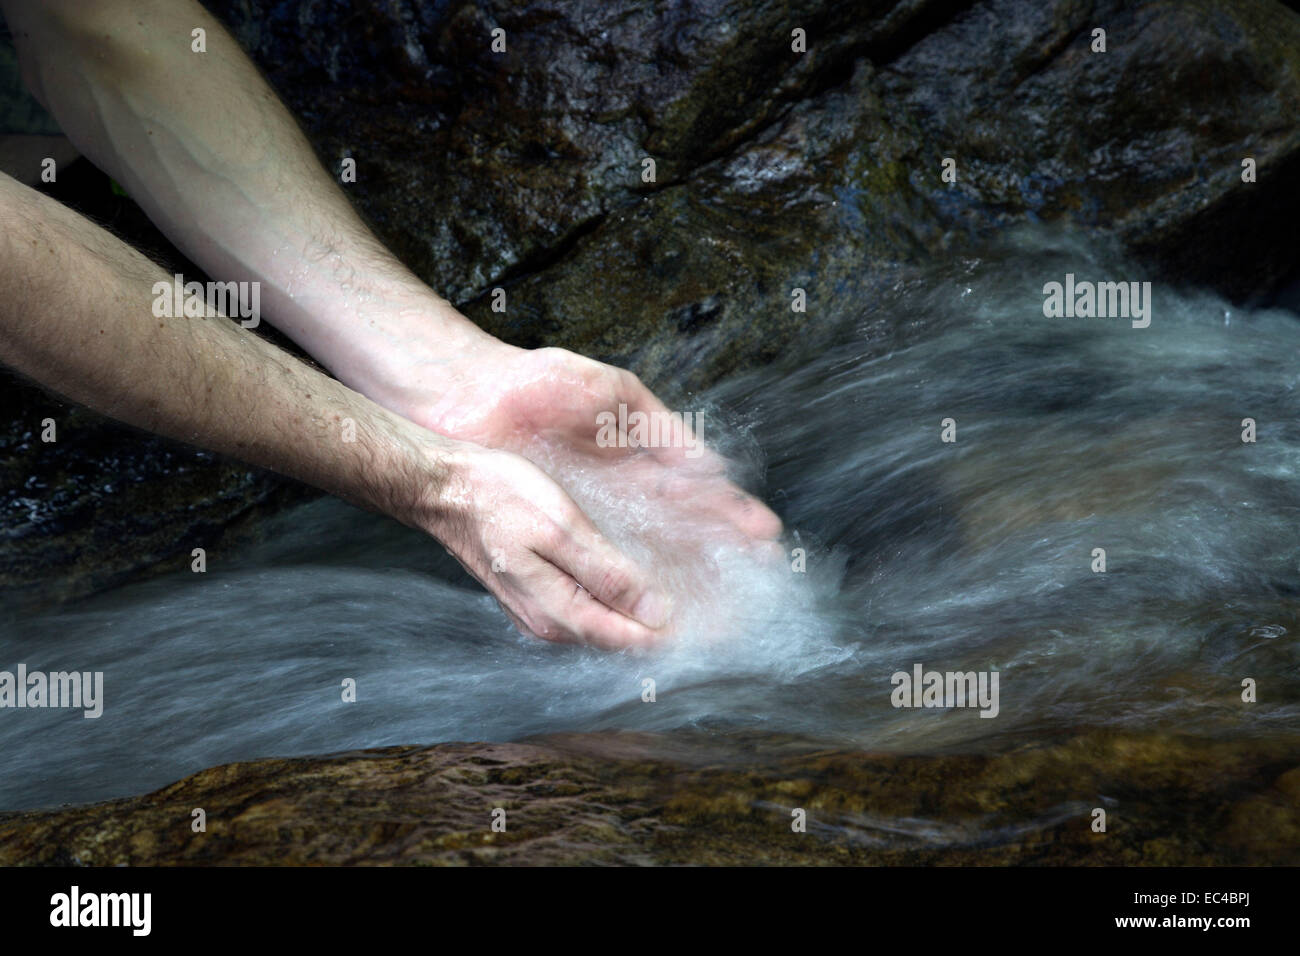 wahing hands in a stream Stock Photo